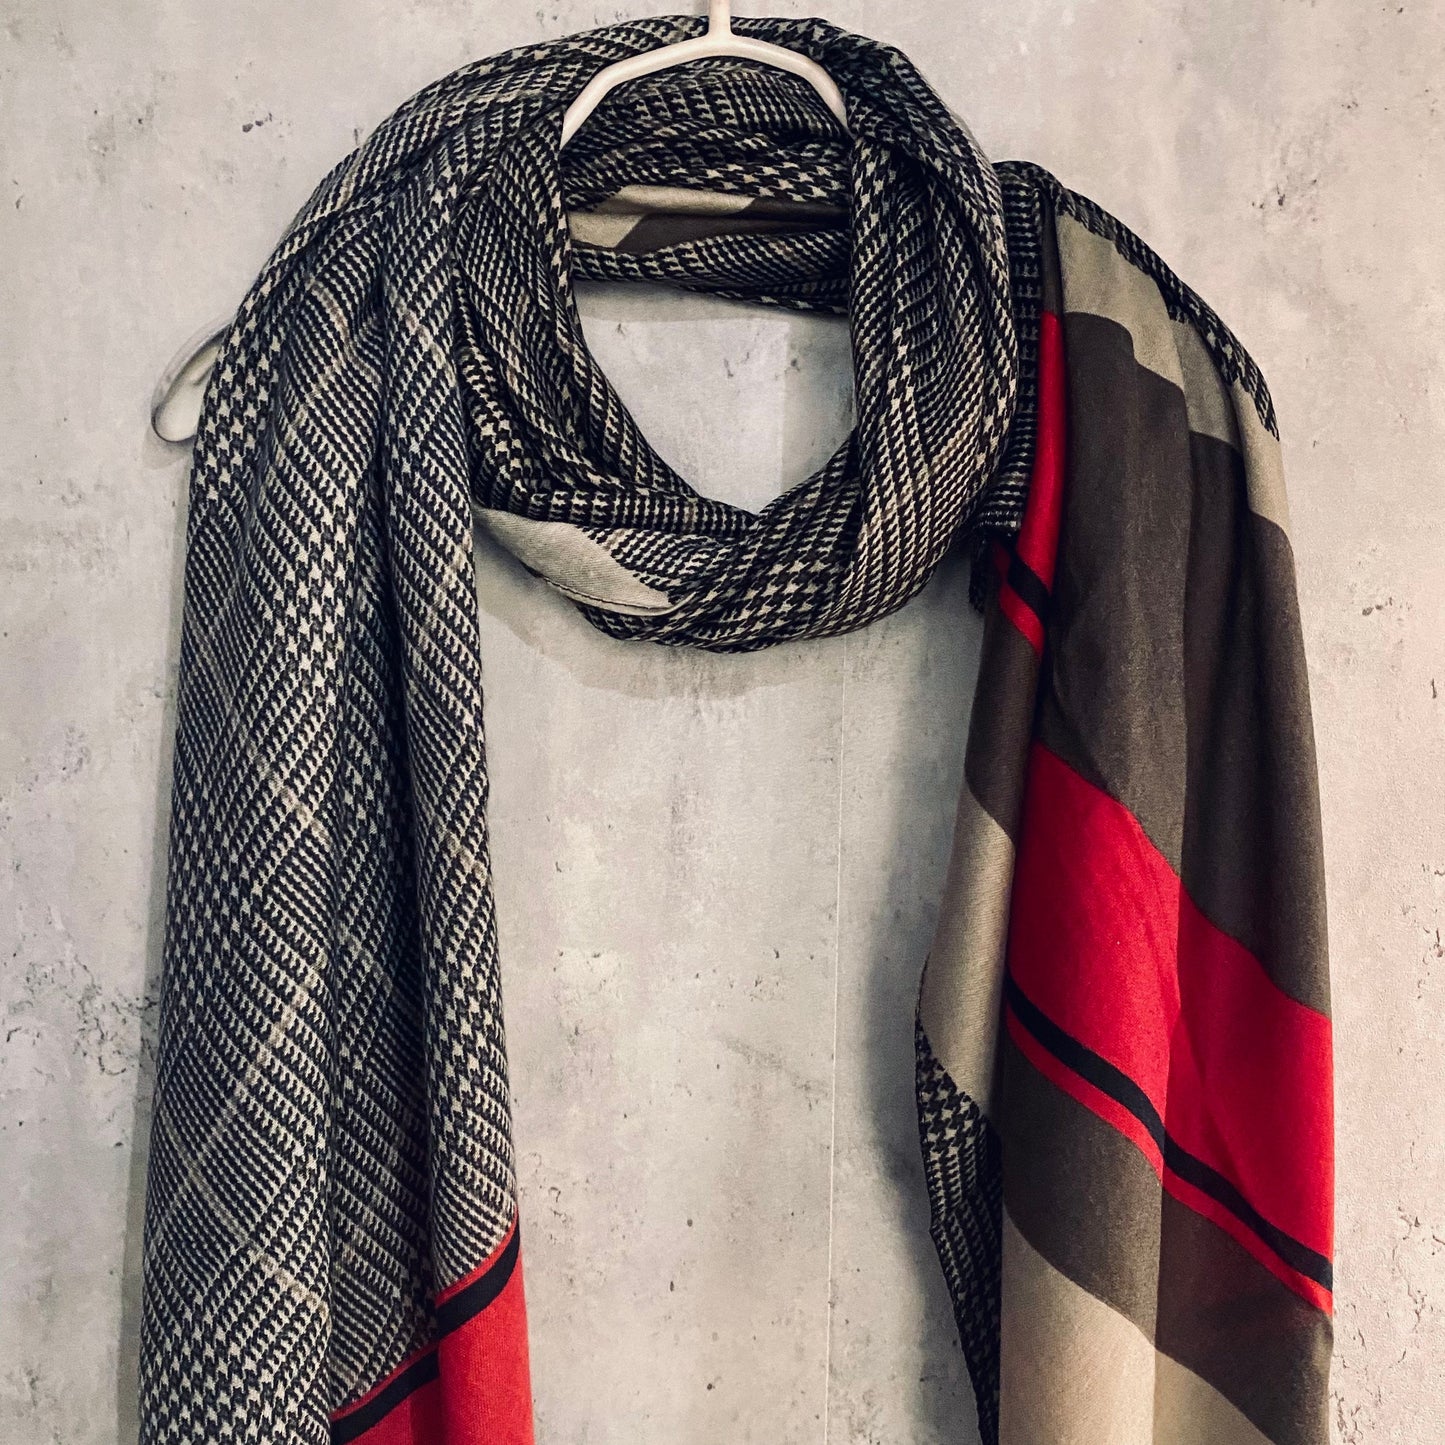 Plaid Pattern With Red Trim Grey Cotton Scarf/Summer Autumn Scarf/Gifts For Mom/Gifts For Her Birthday Christmas/Scarf Women/UK Seller